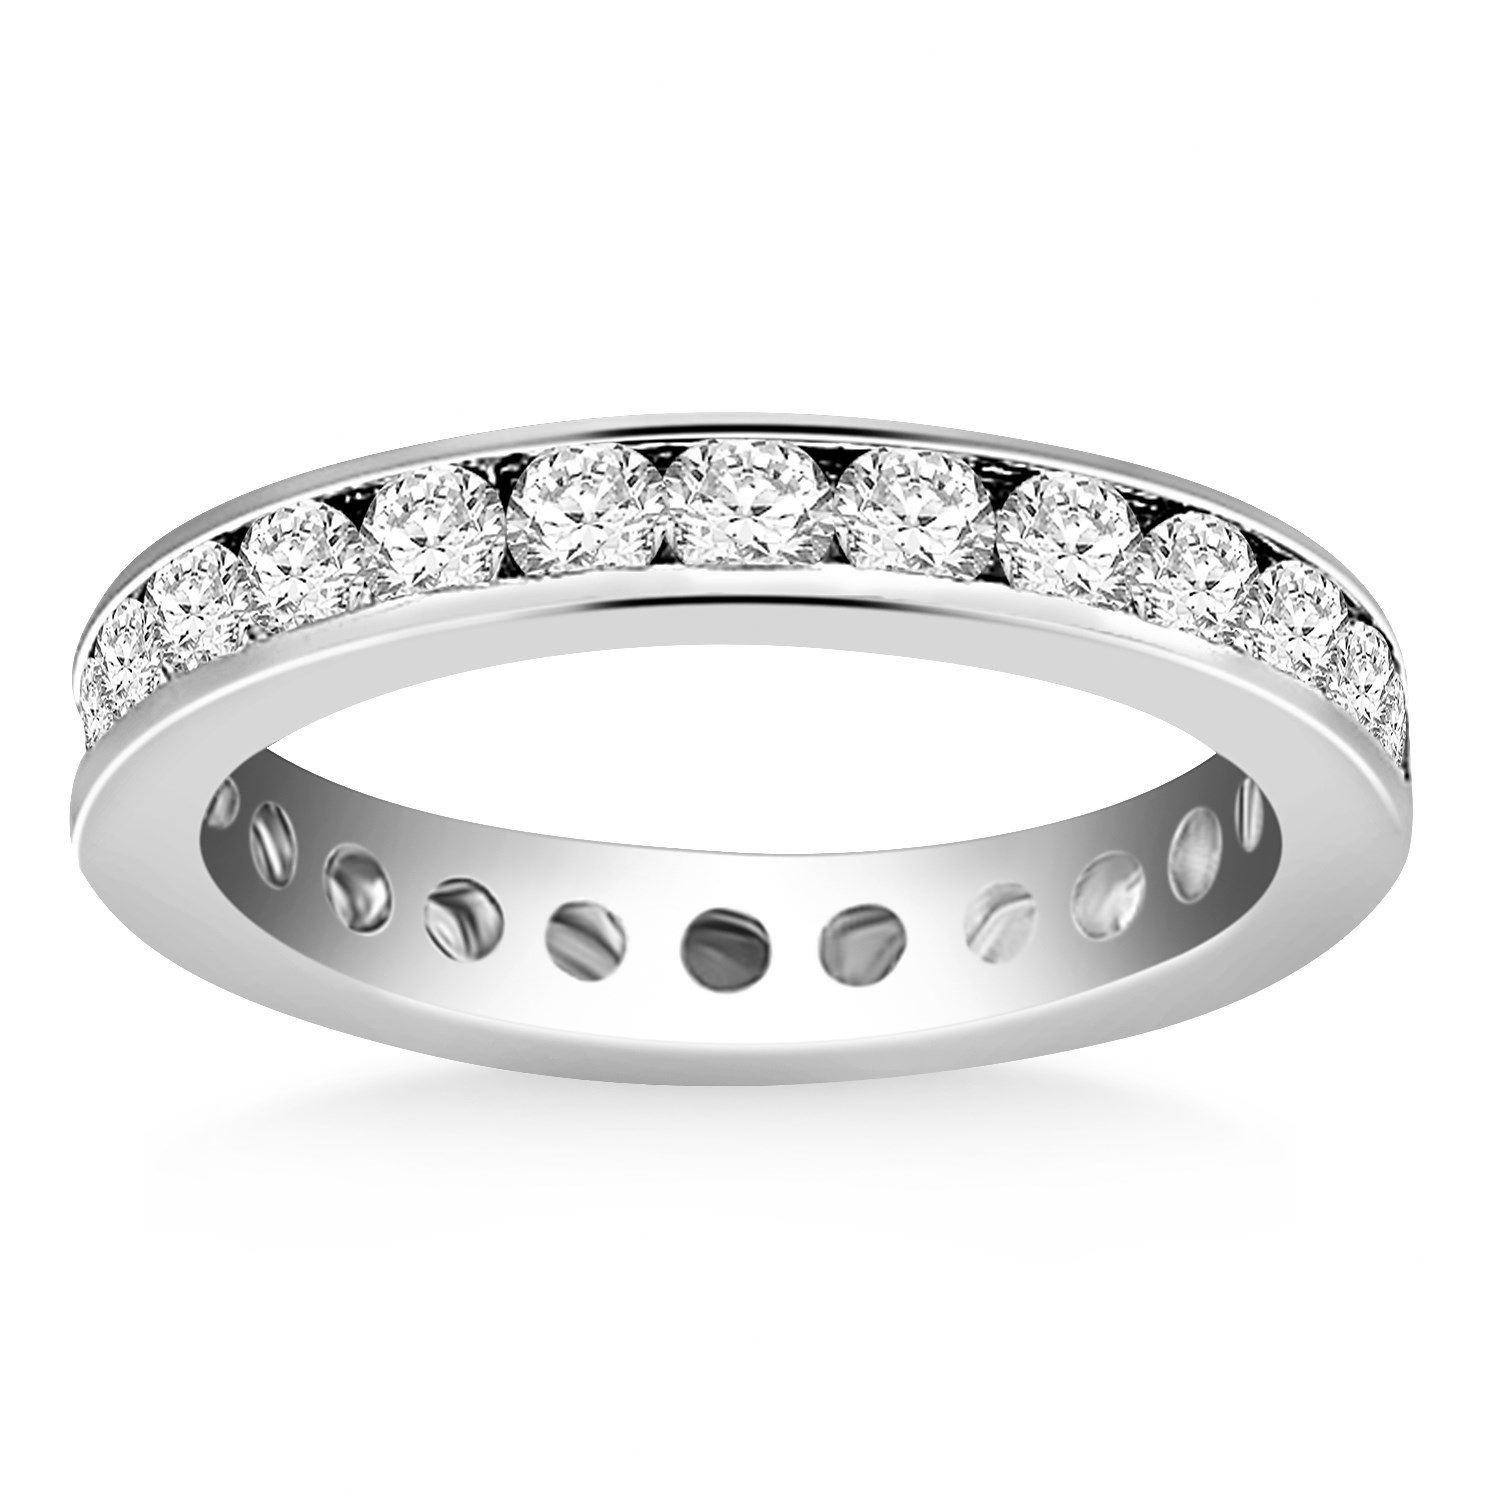 14k White Gold Eternity Ring with Channel Set Round Diamonds